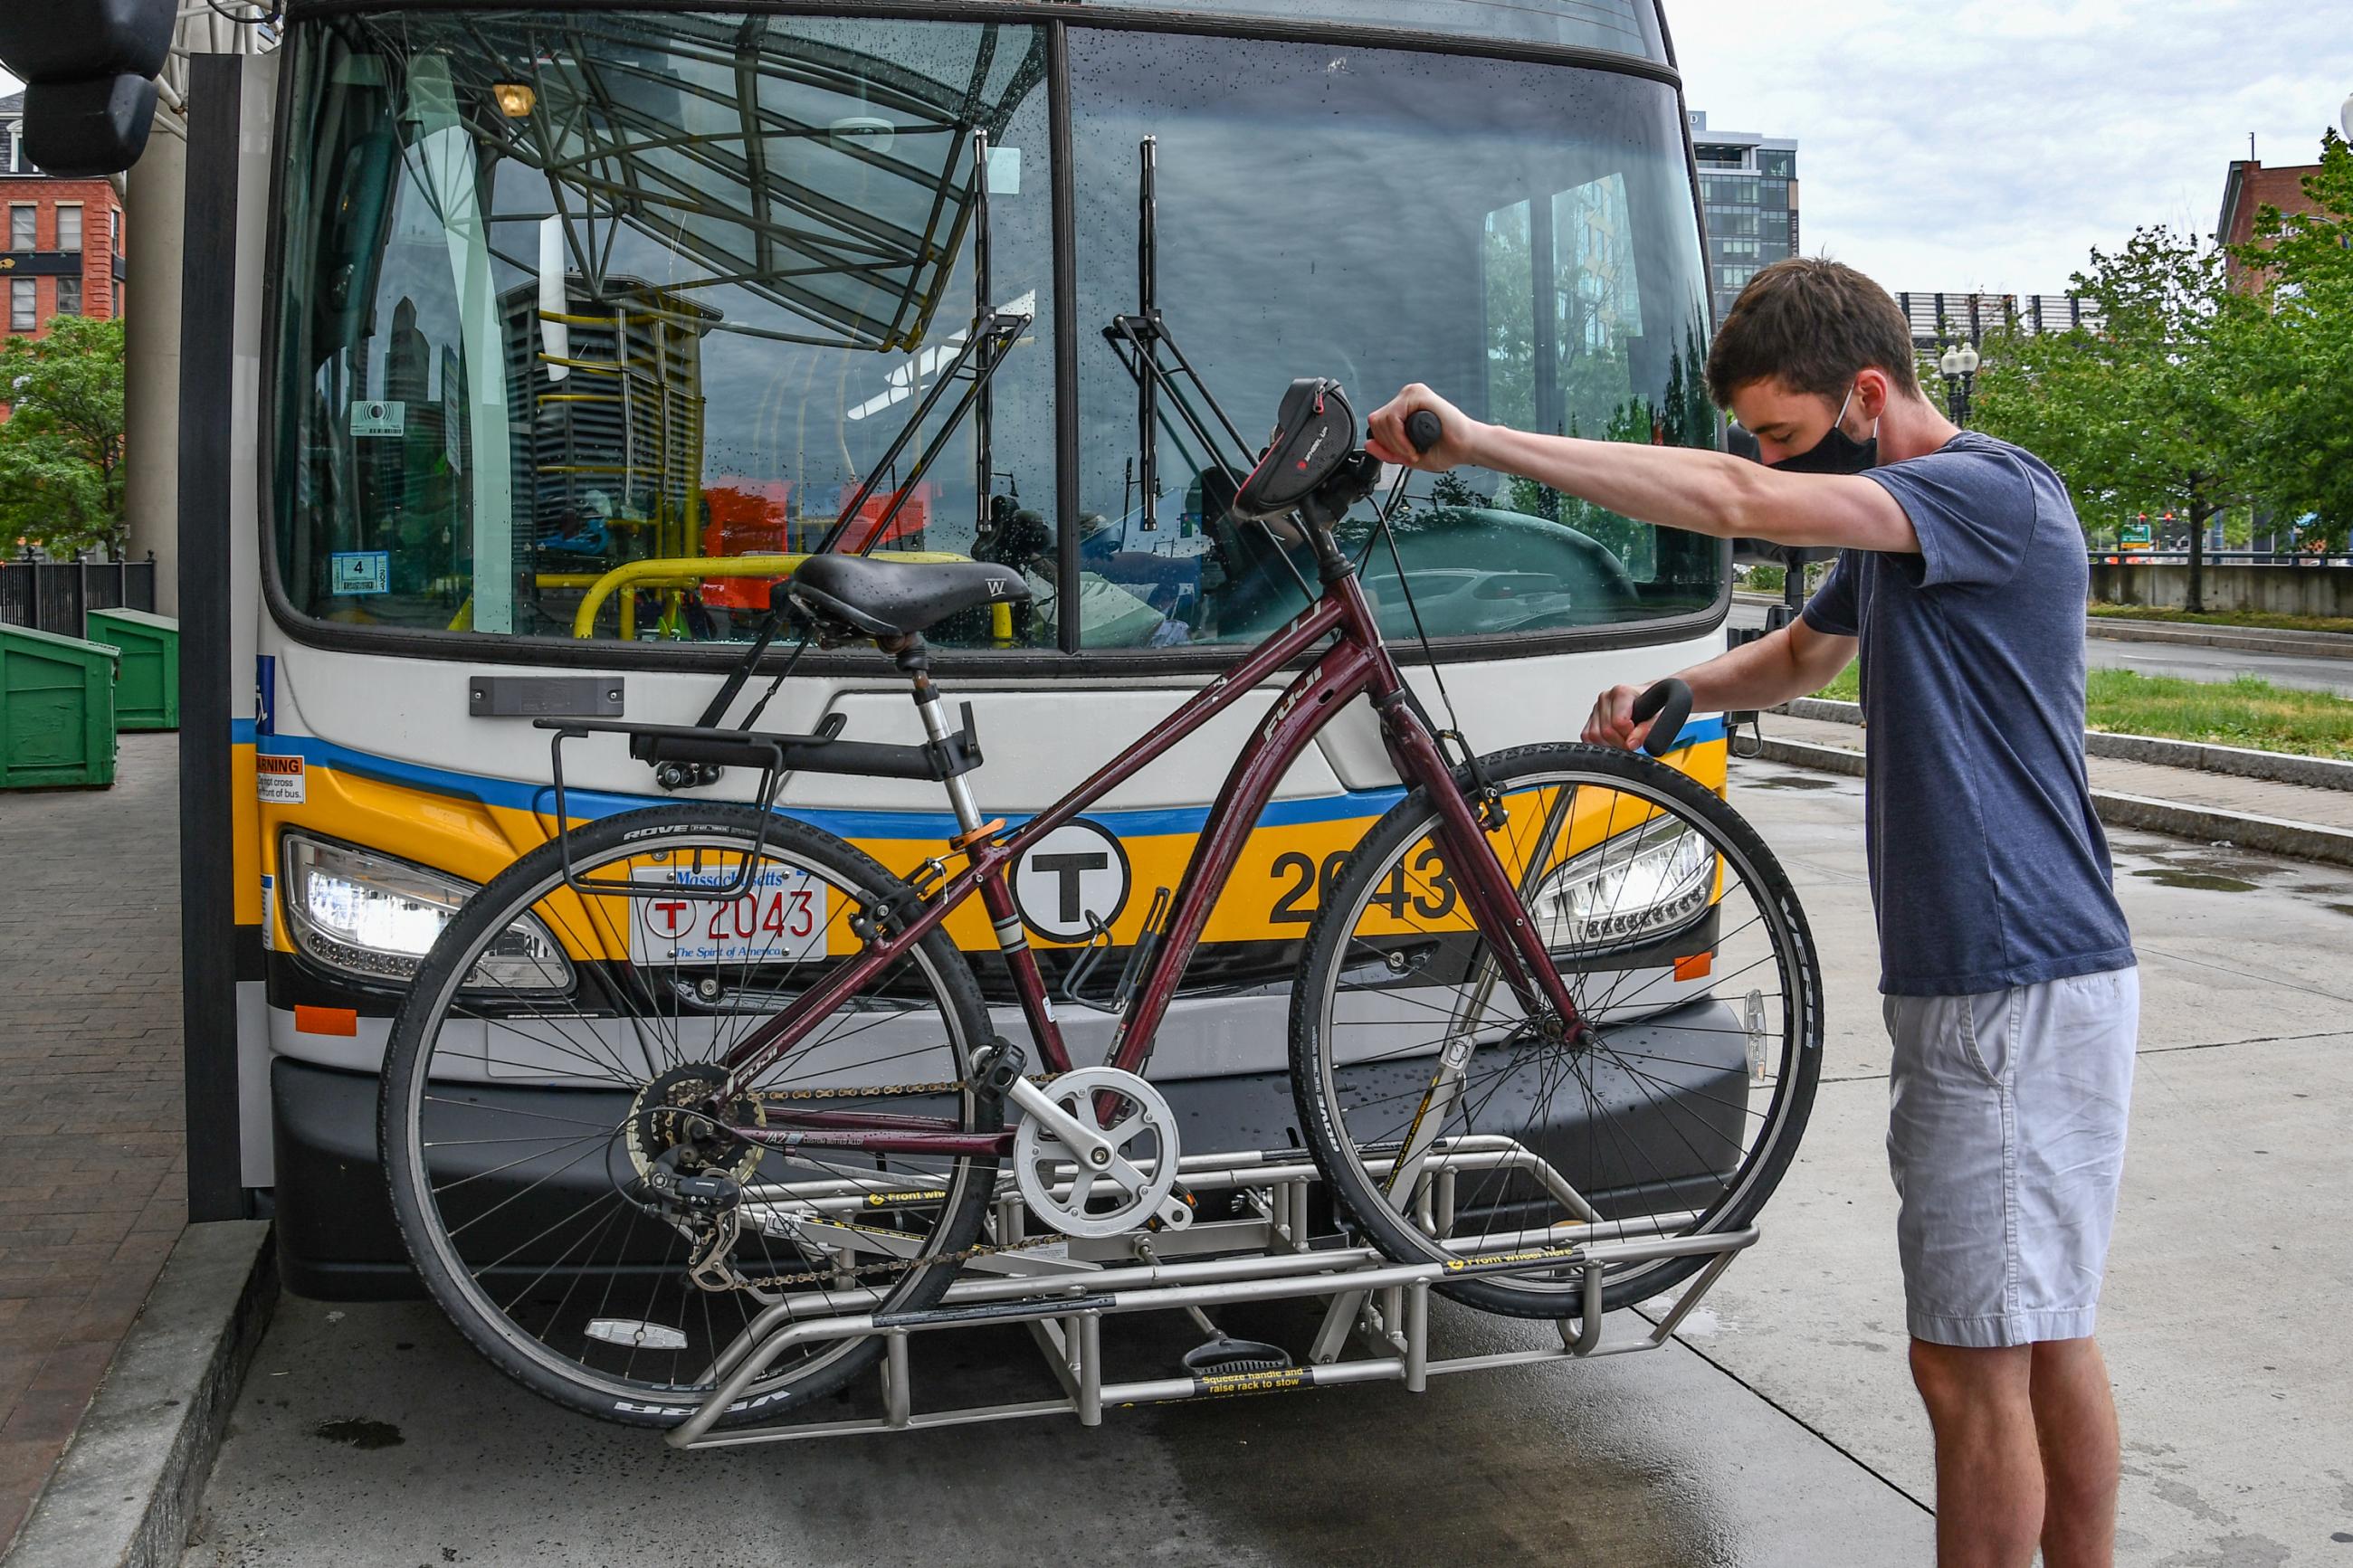 A person secures a bicycle on the bike rack on the front of a bus at Haymarket station